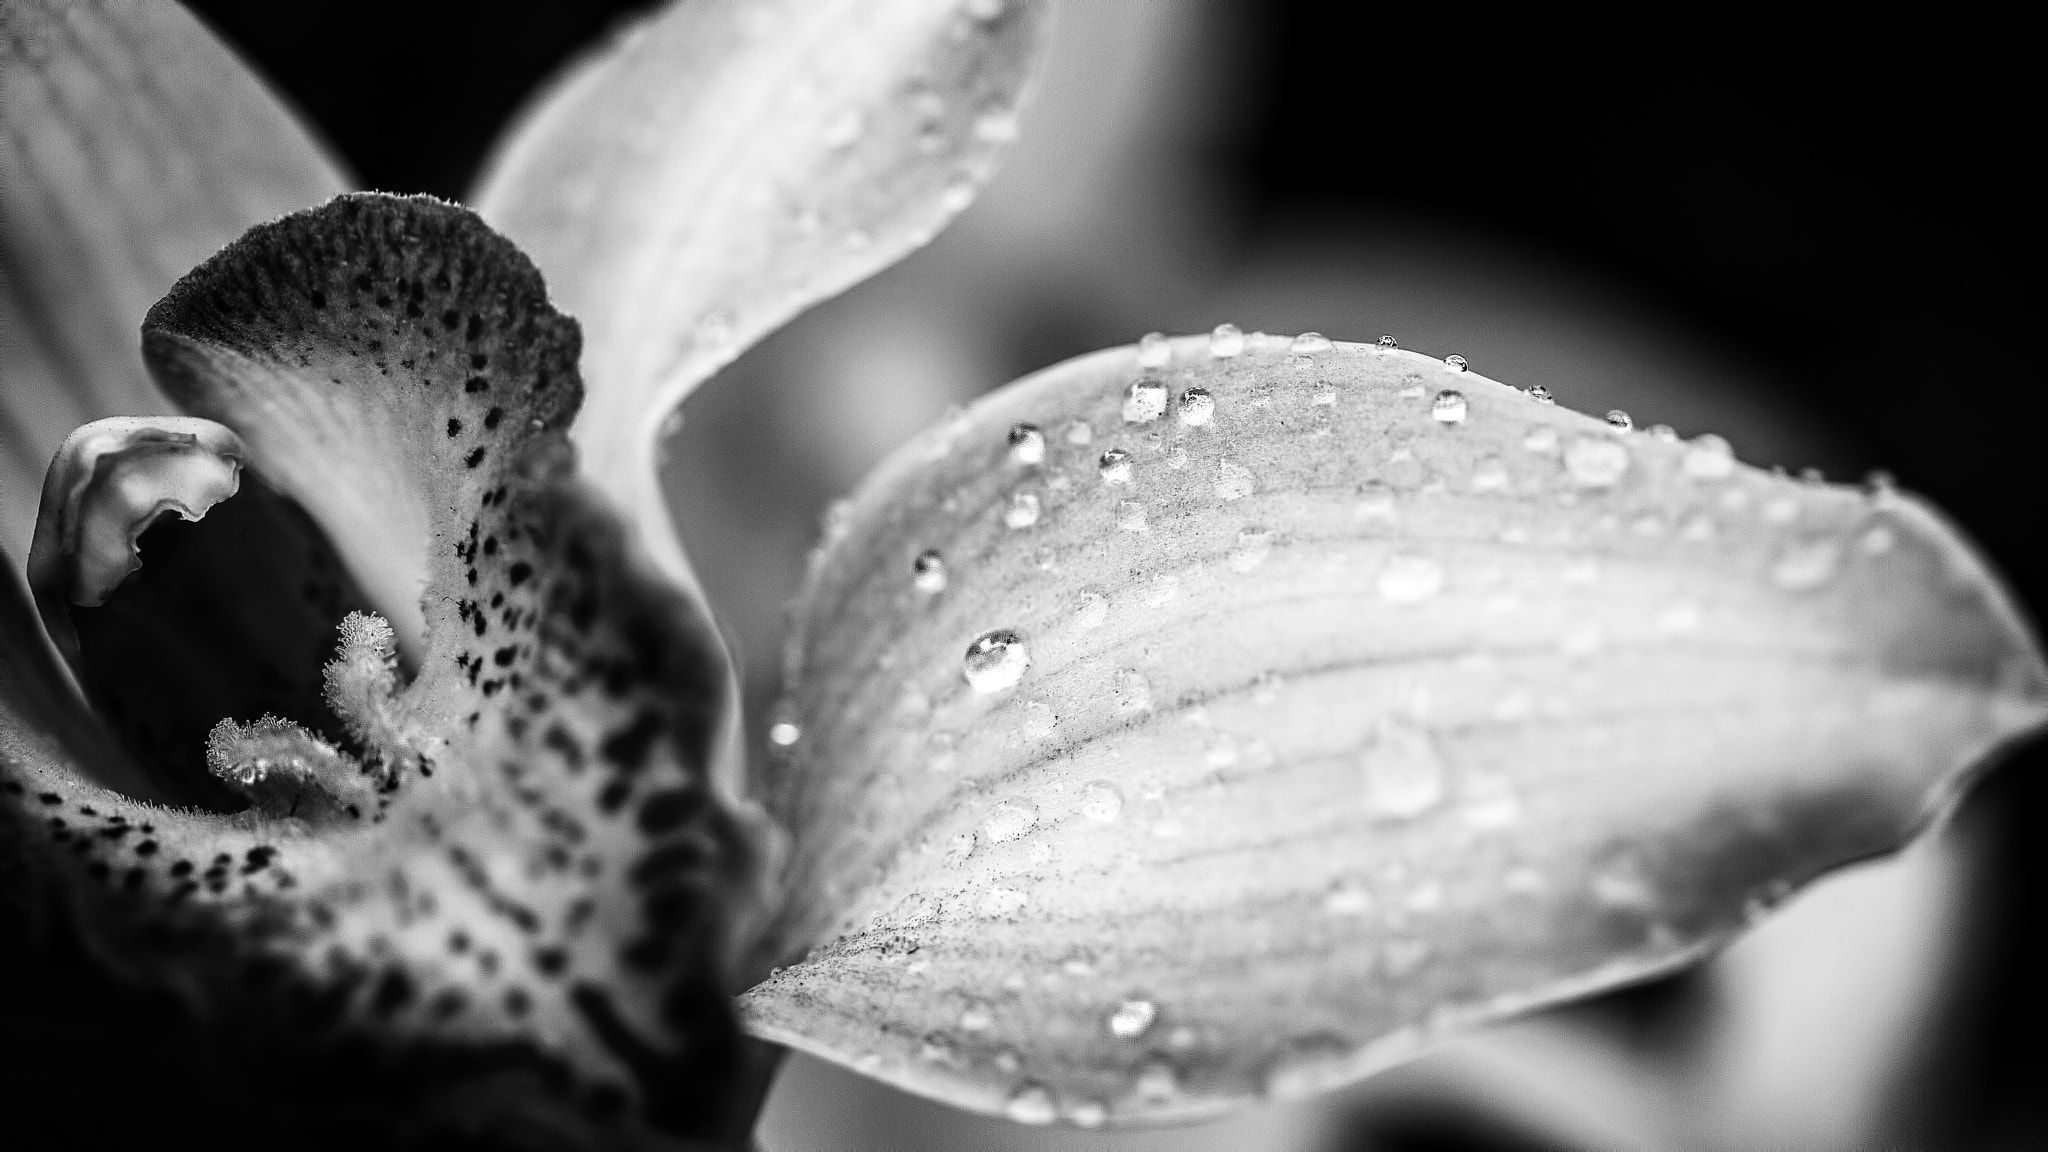 Orchid by begoña garcia on 500px.com